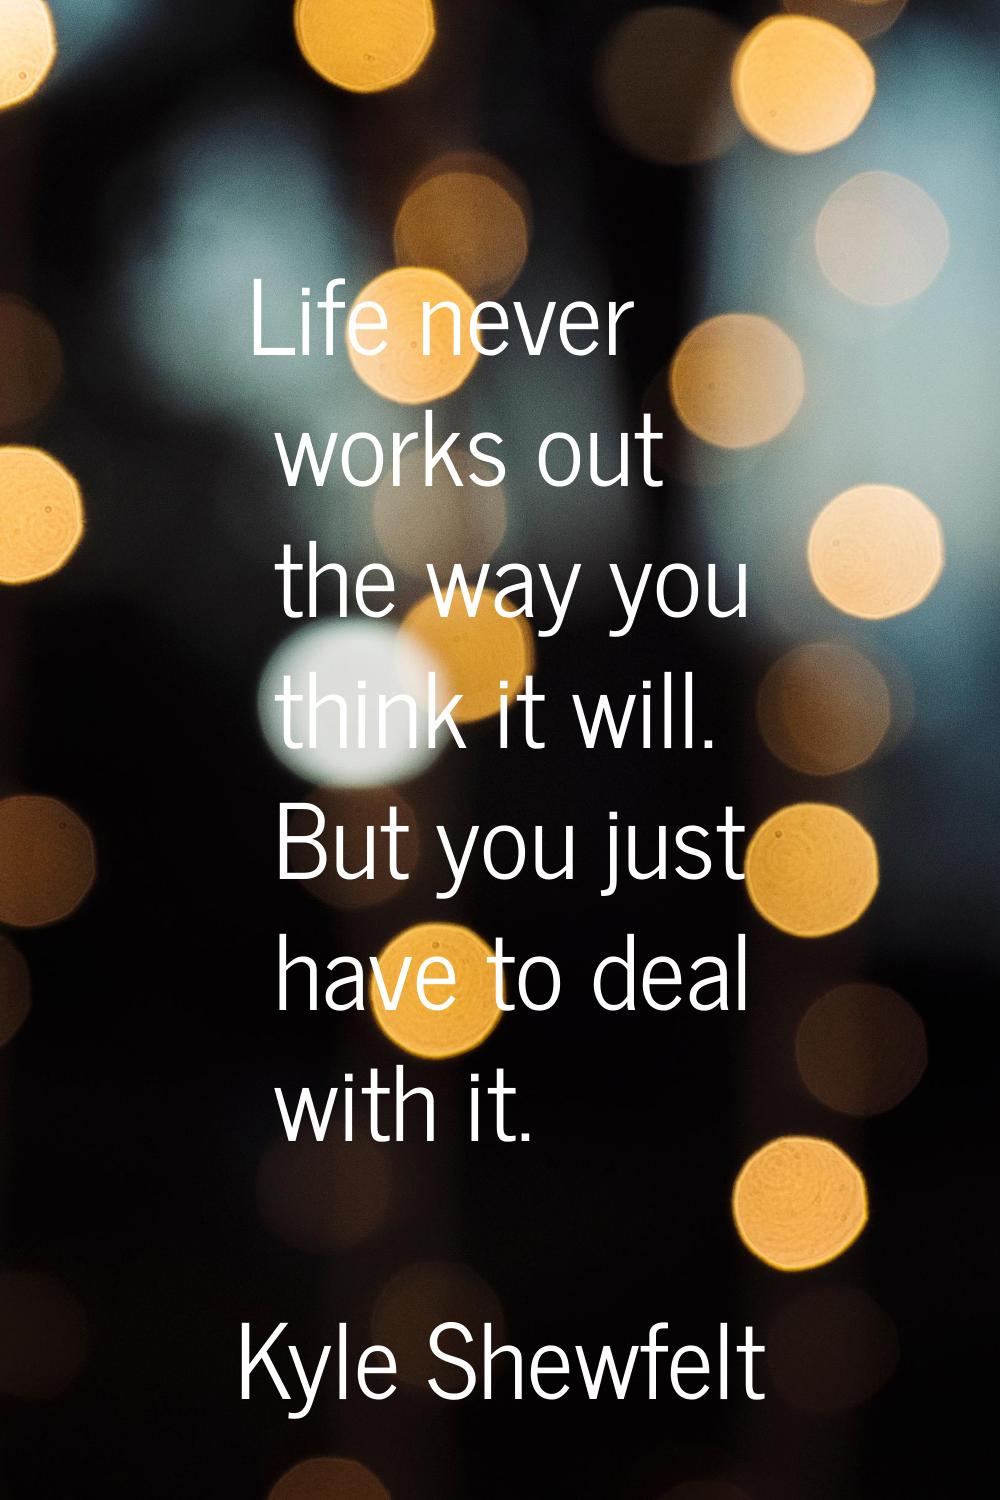 Life never works out the way you think it will. But you just have to deal with it.